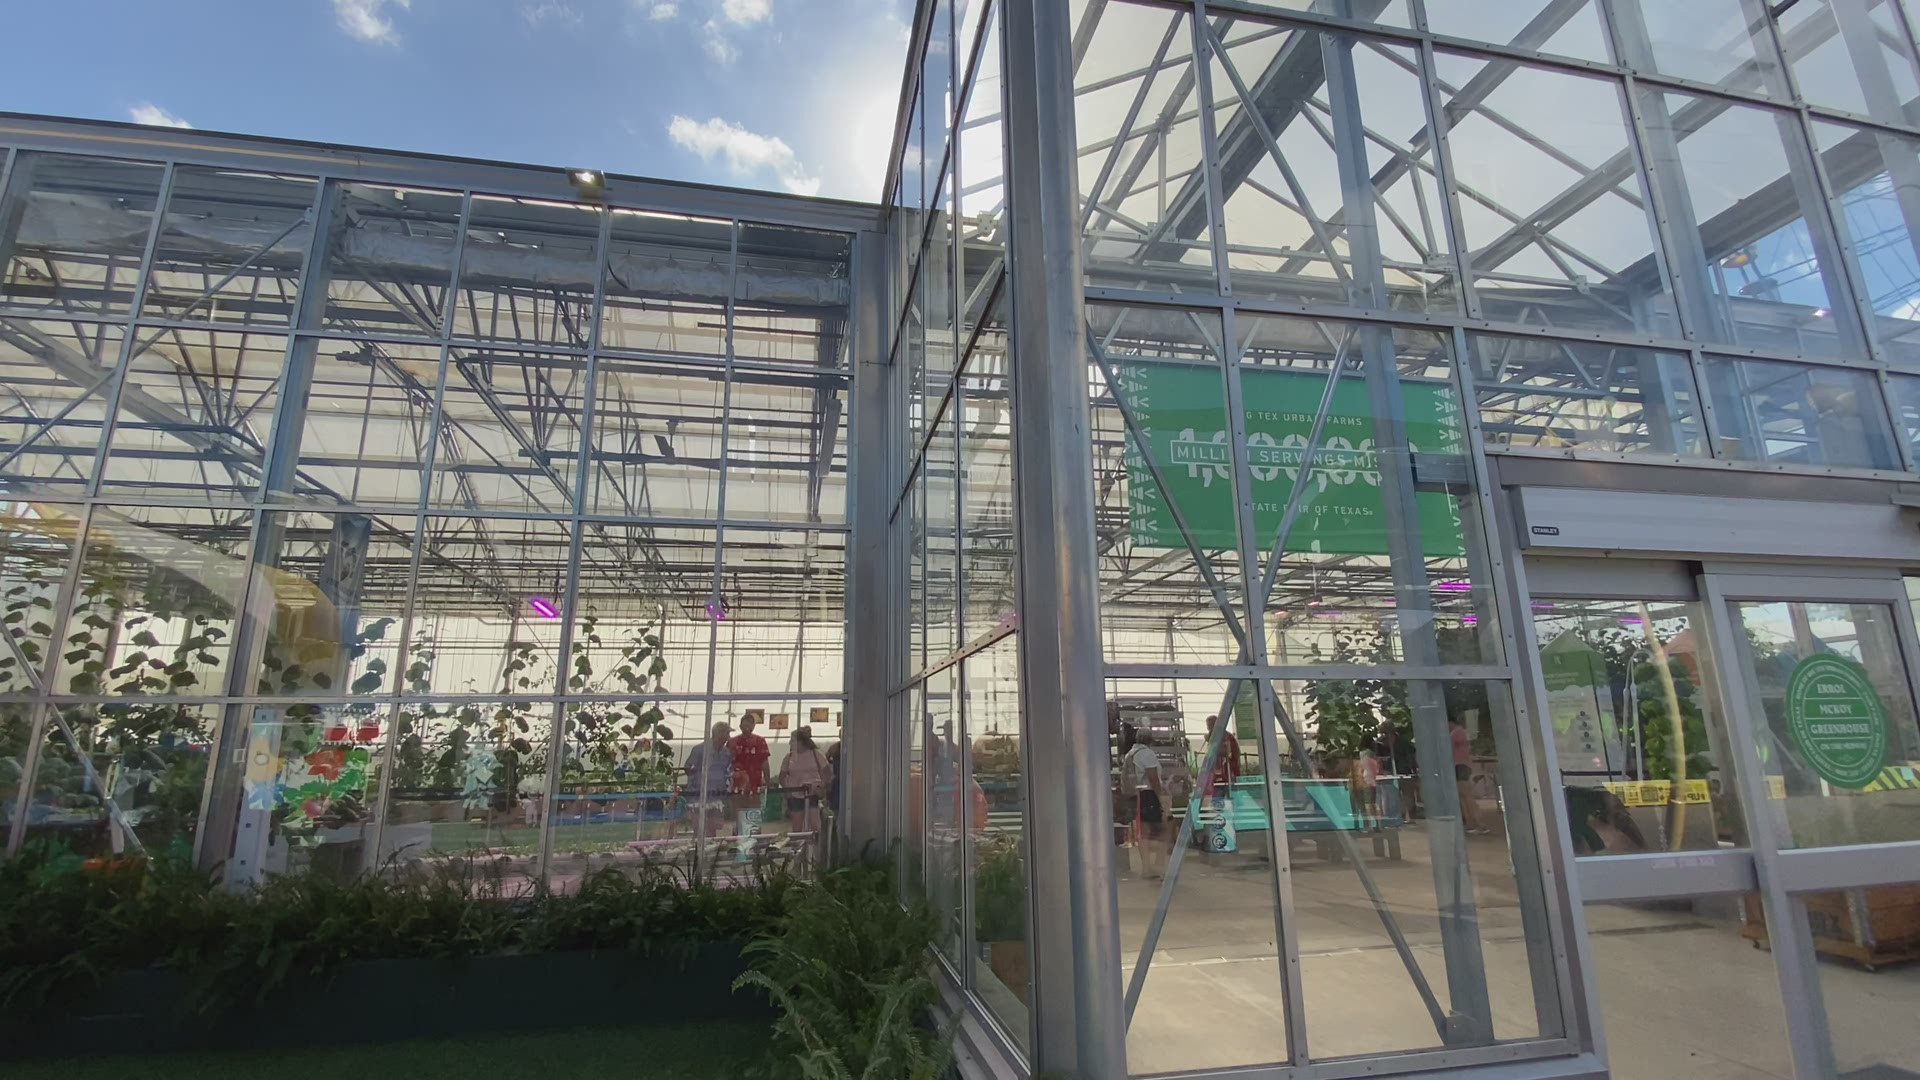 Behind the scenes during WFAA's visit to the Greenhouse at the State Fair of Texas.